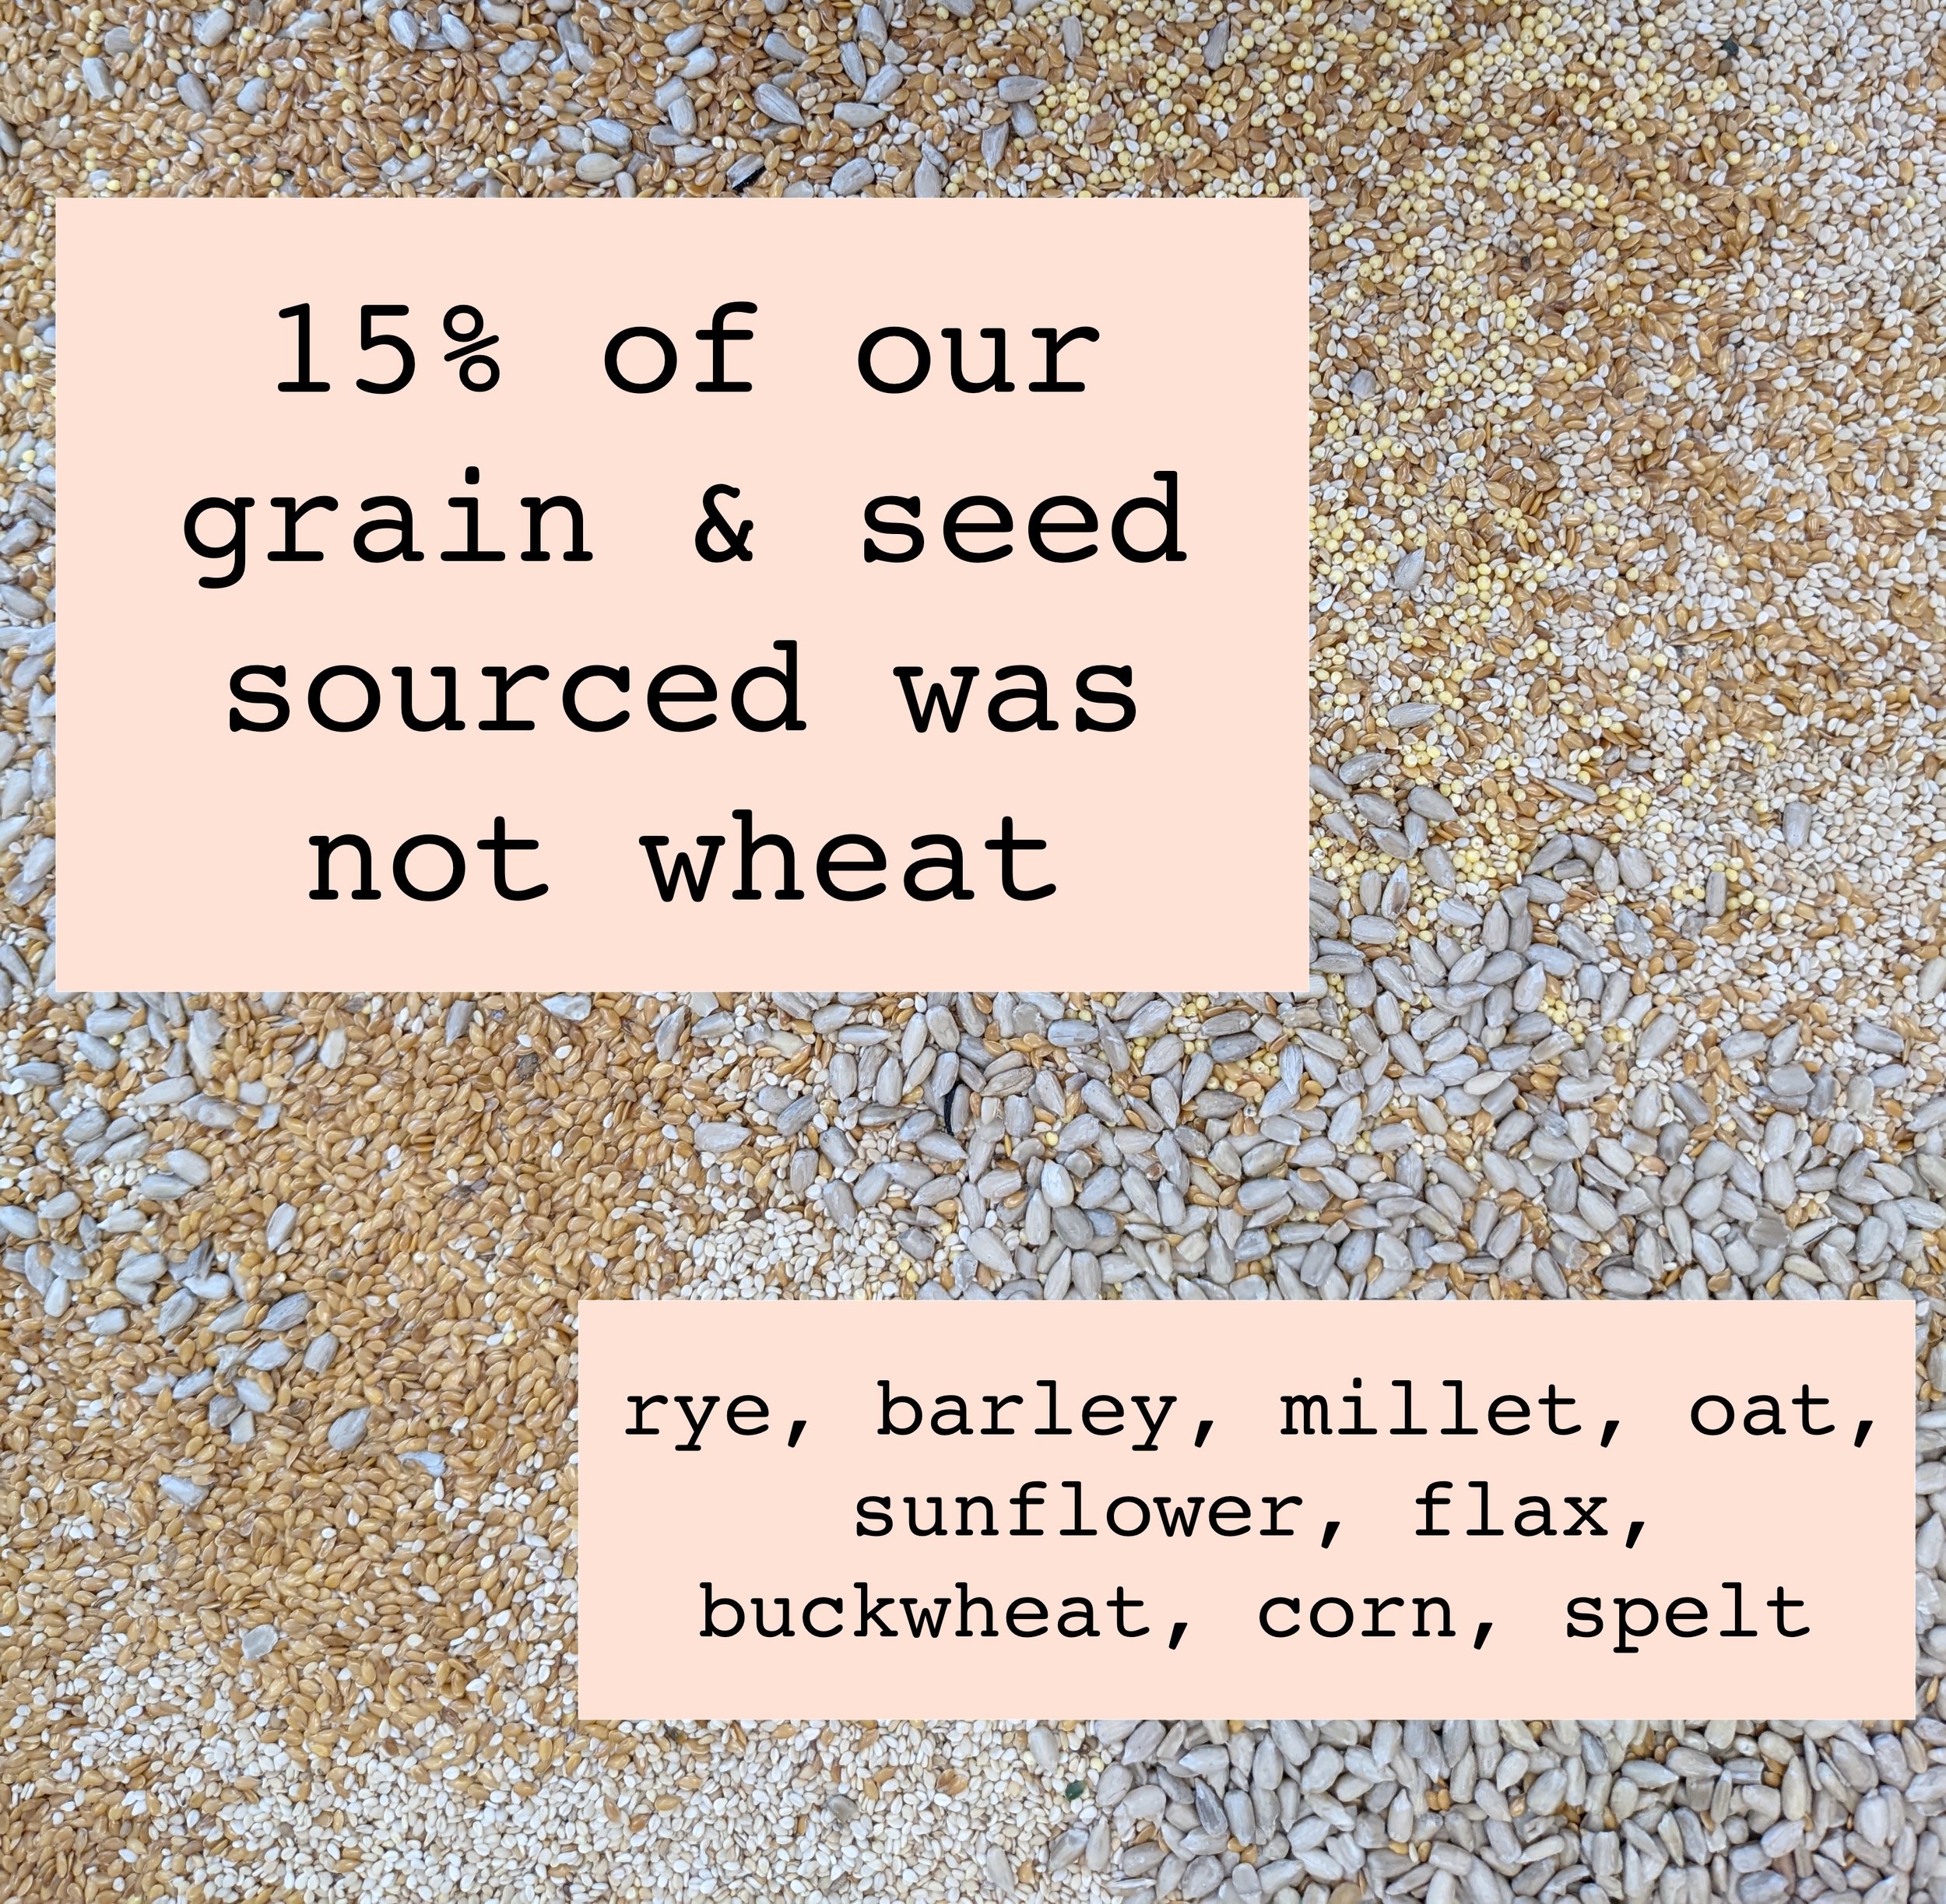  diversity is important. not all our grain consumption is wheat! 